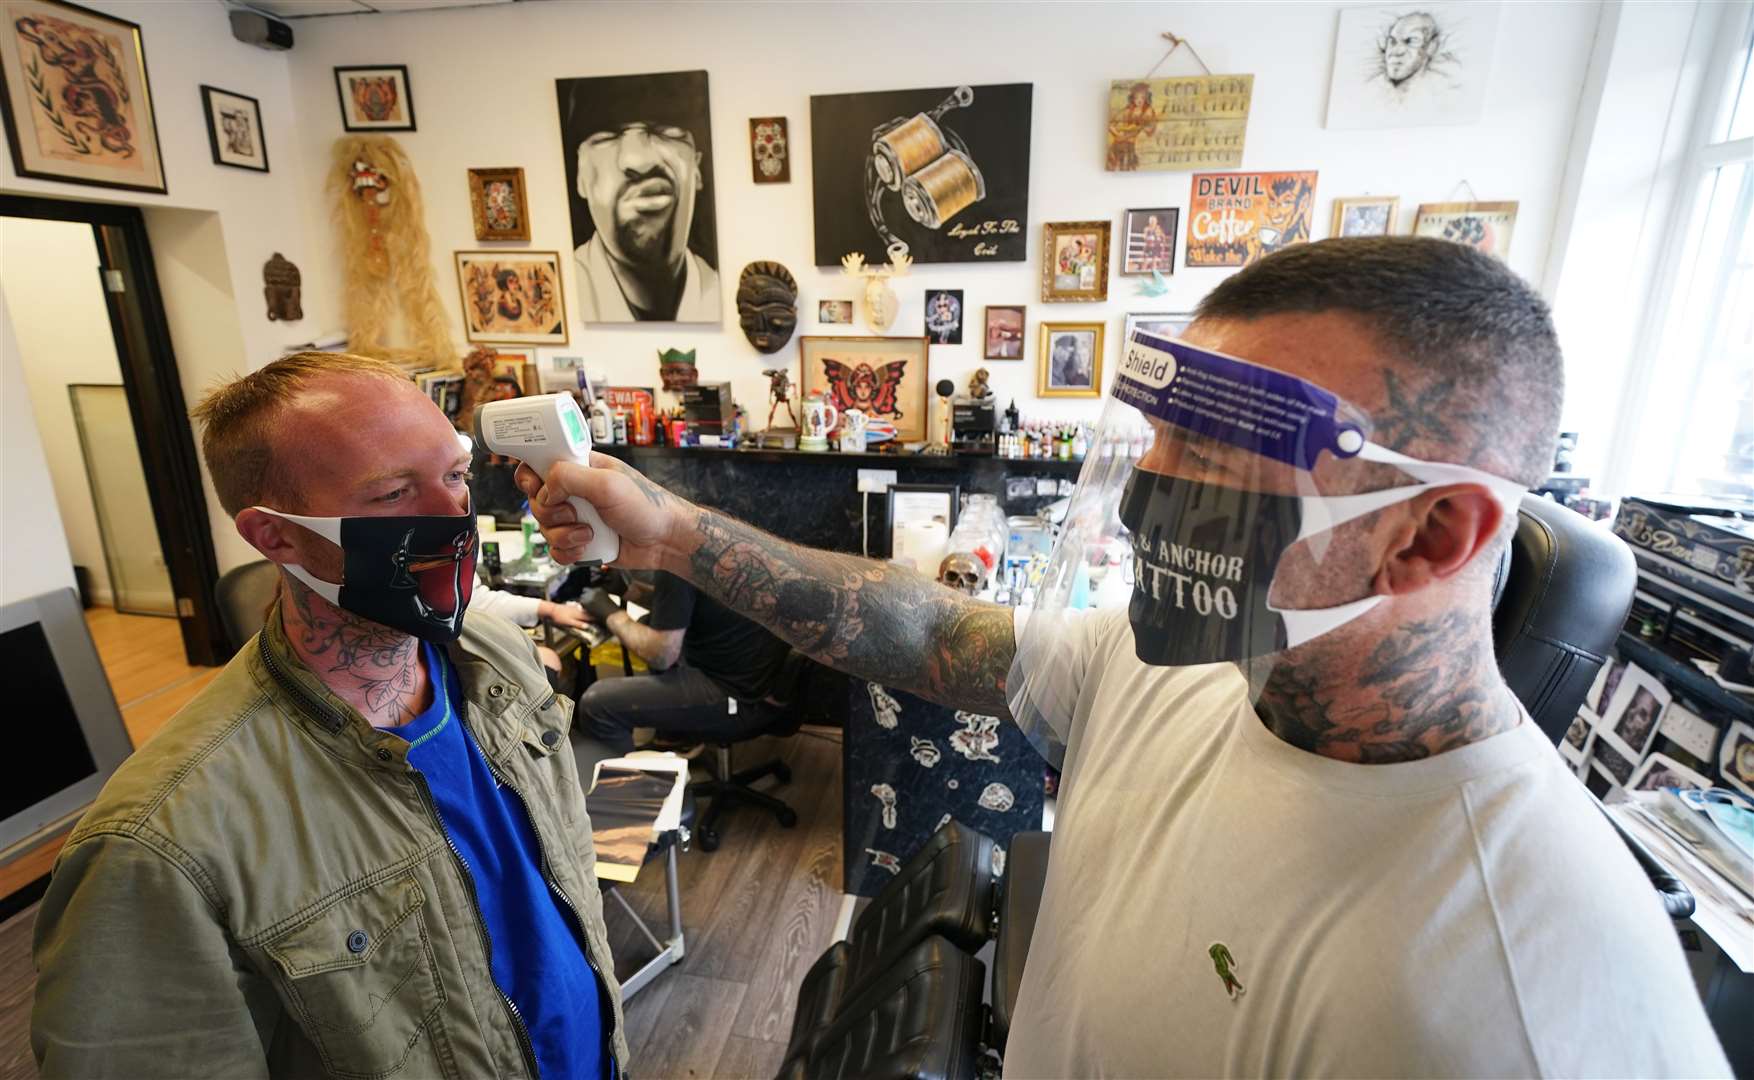 Tattoo artist Dan Ridgewell takes the temperature of a customer at the Axe & Anchor tattoo shop in North Shields, North Tyneside (Owen Humphreys/PA)